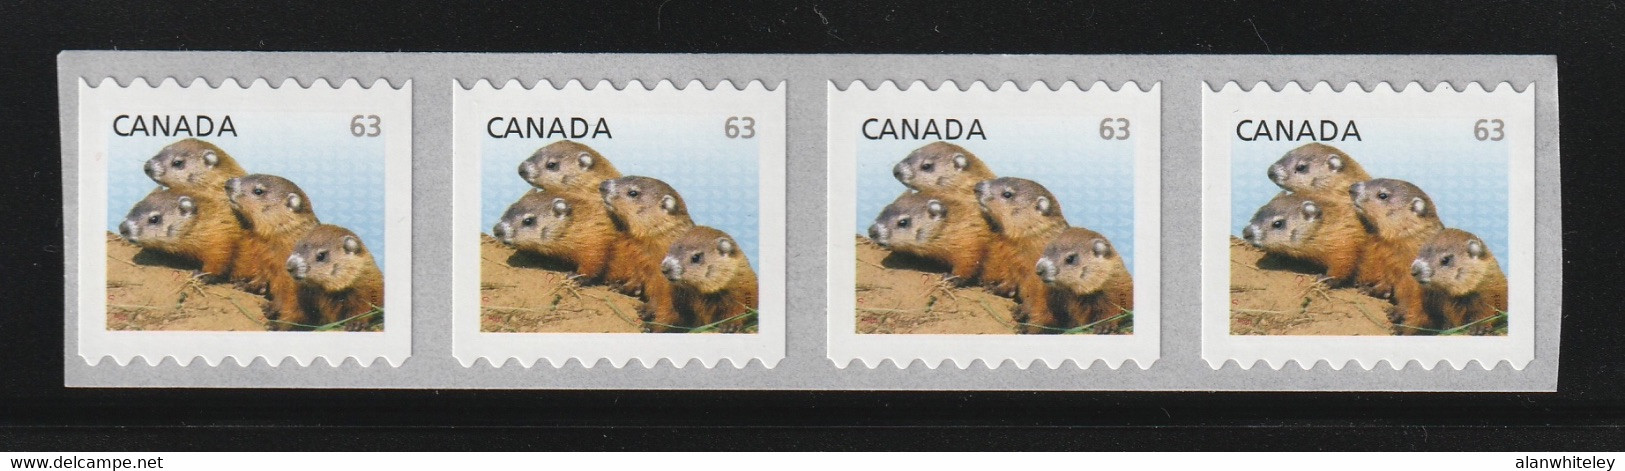 CANADA 2013 Definitives / Young Wildlife / Woodchucks 63c S/ADH: Strip Of 4 Stamps (Sideways) UM/MNH - Coil Stamps